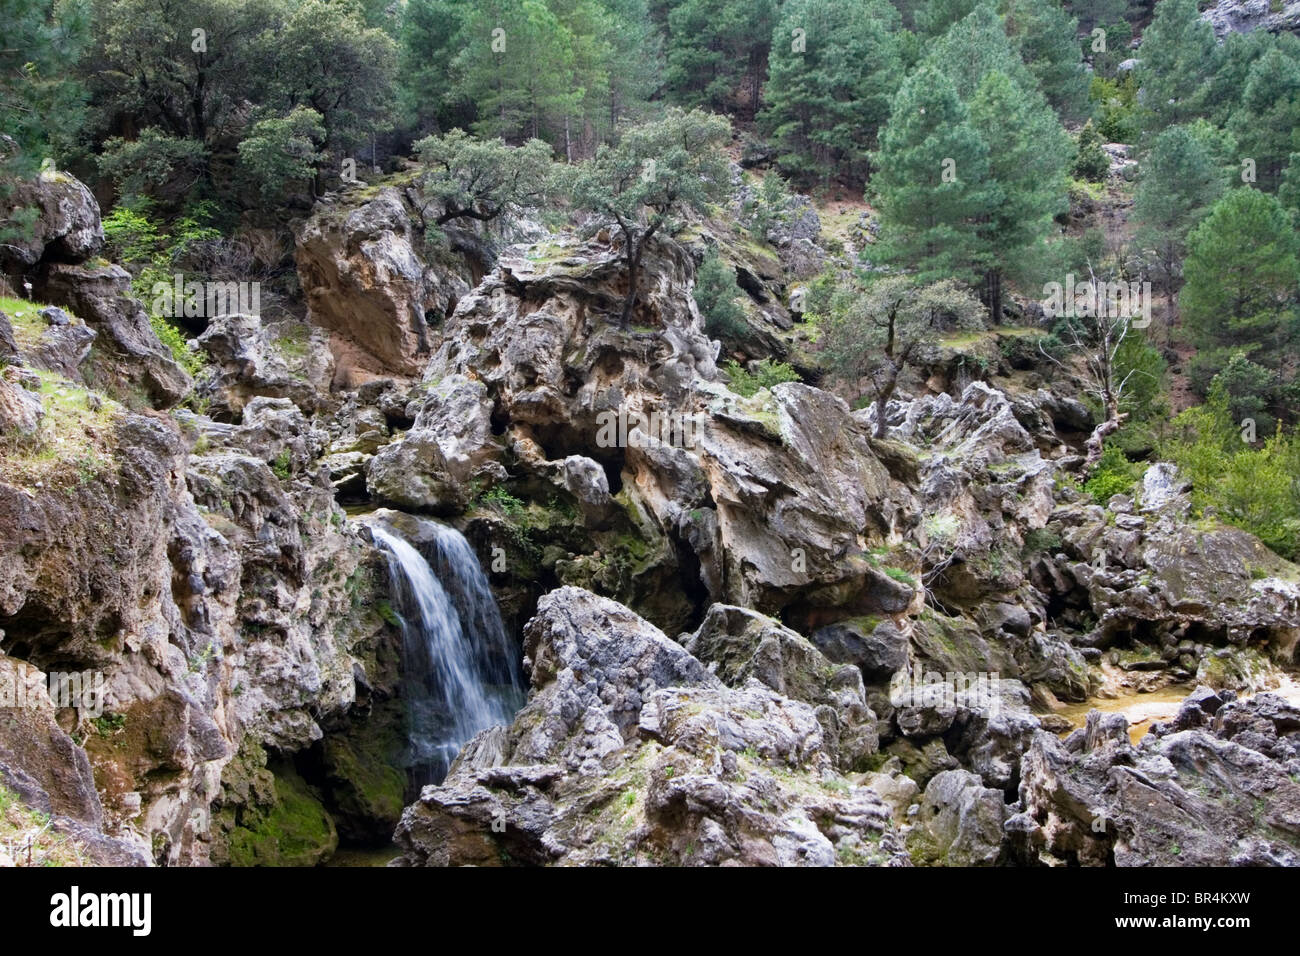 Beautiful scenery of a waterfall on a rocky mountainside, Cazorla National Park, Jaen Province, Andalucia, Spain Stock Photo